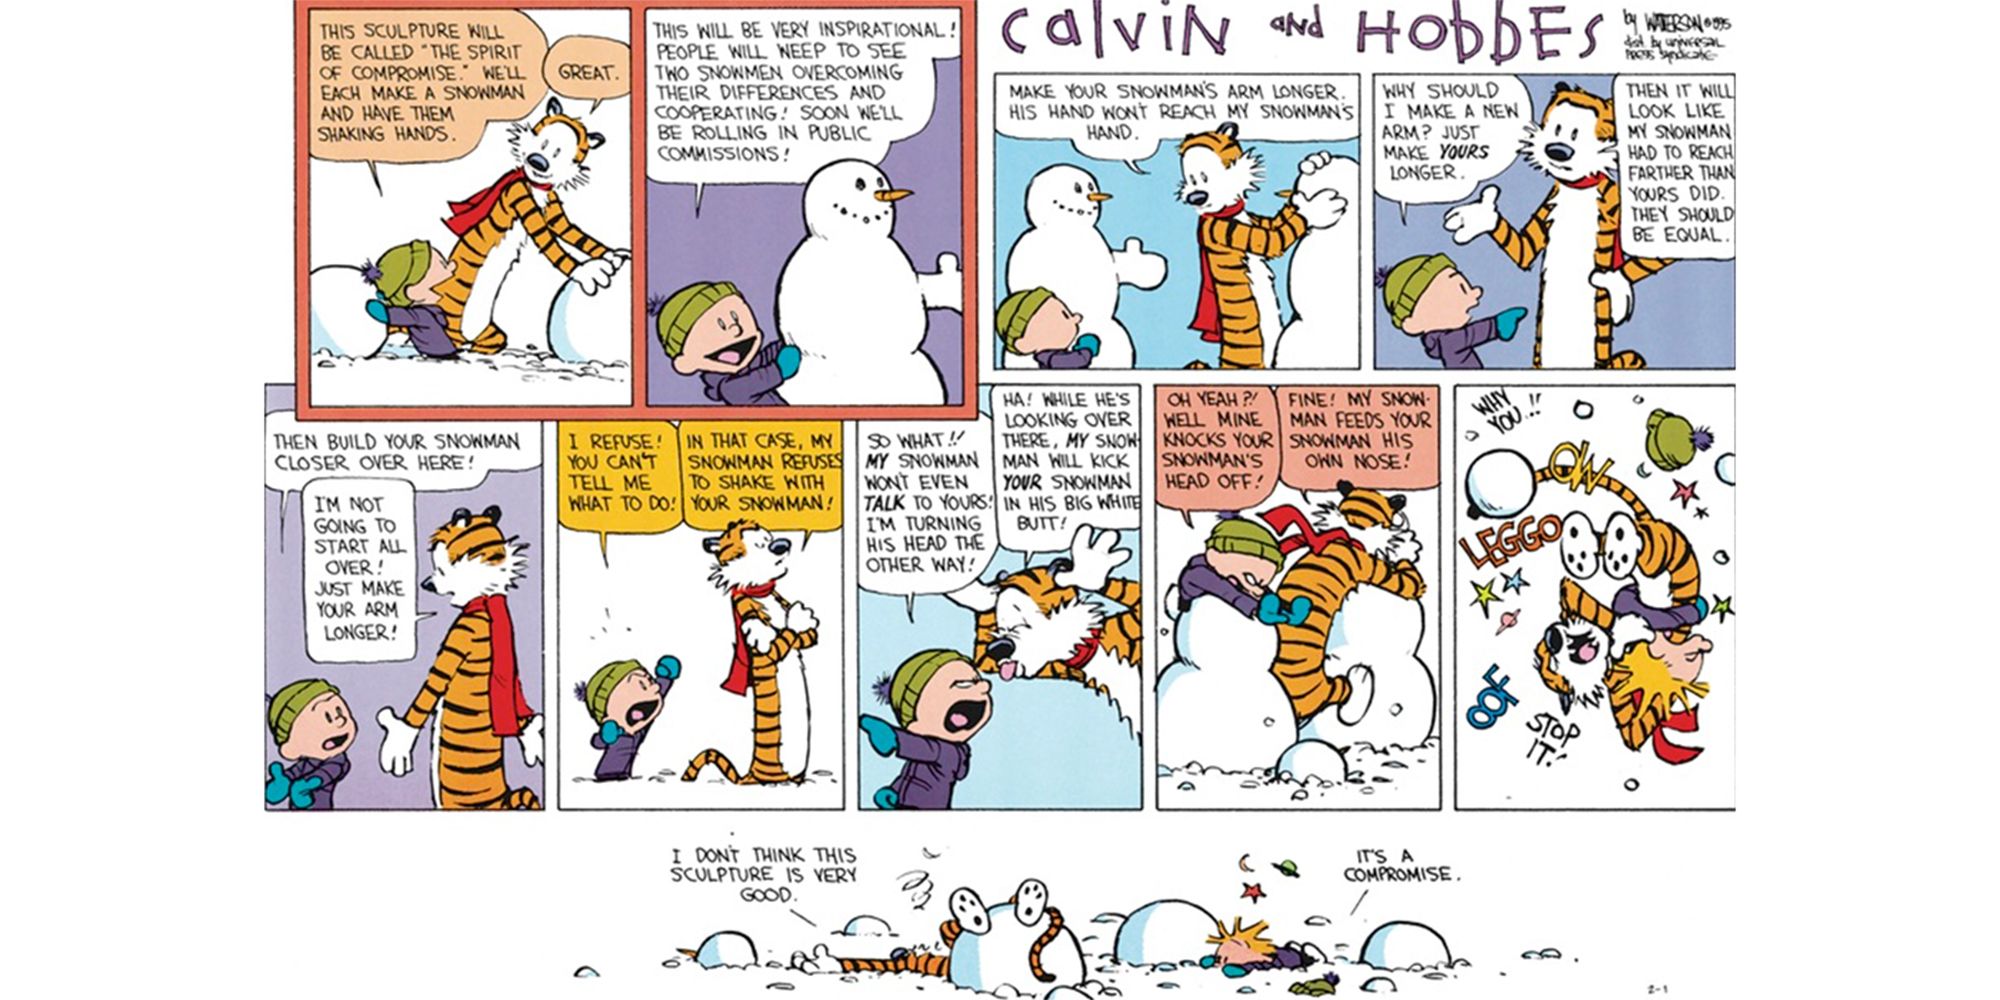 Calvin and Hobbes make the spirit of cooperation out of snow